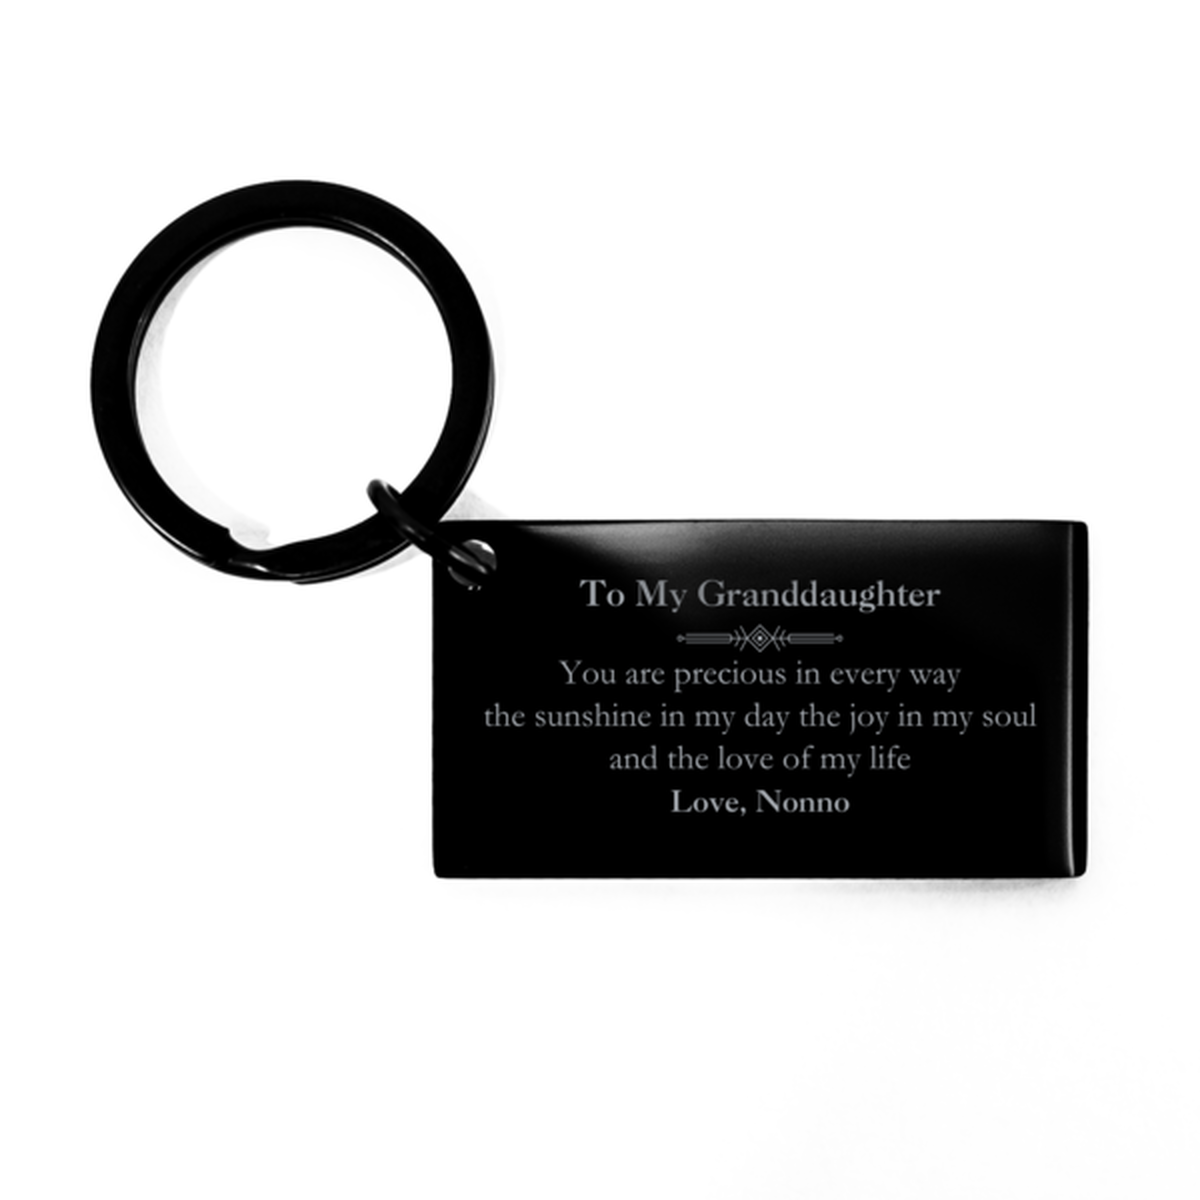 Graduation Gifts for Granddaughter Keychain Present from Nonno, Christmas Granddaughter Birthday Gifts Granddaughter You are precious in every way the sunshine in my day. Love, Nonno